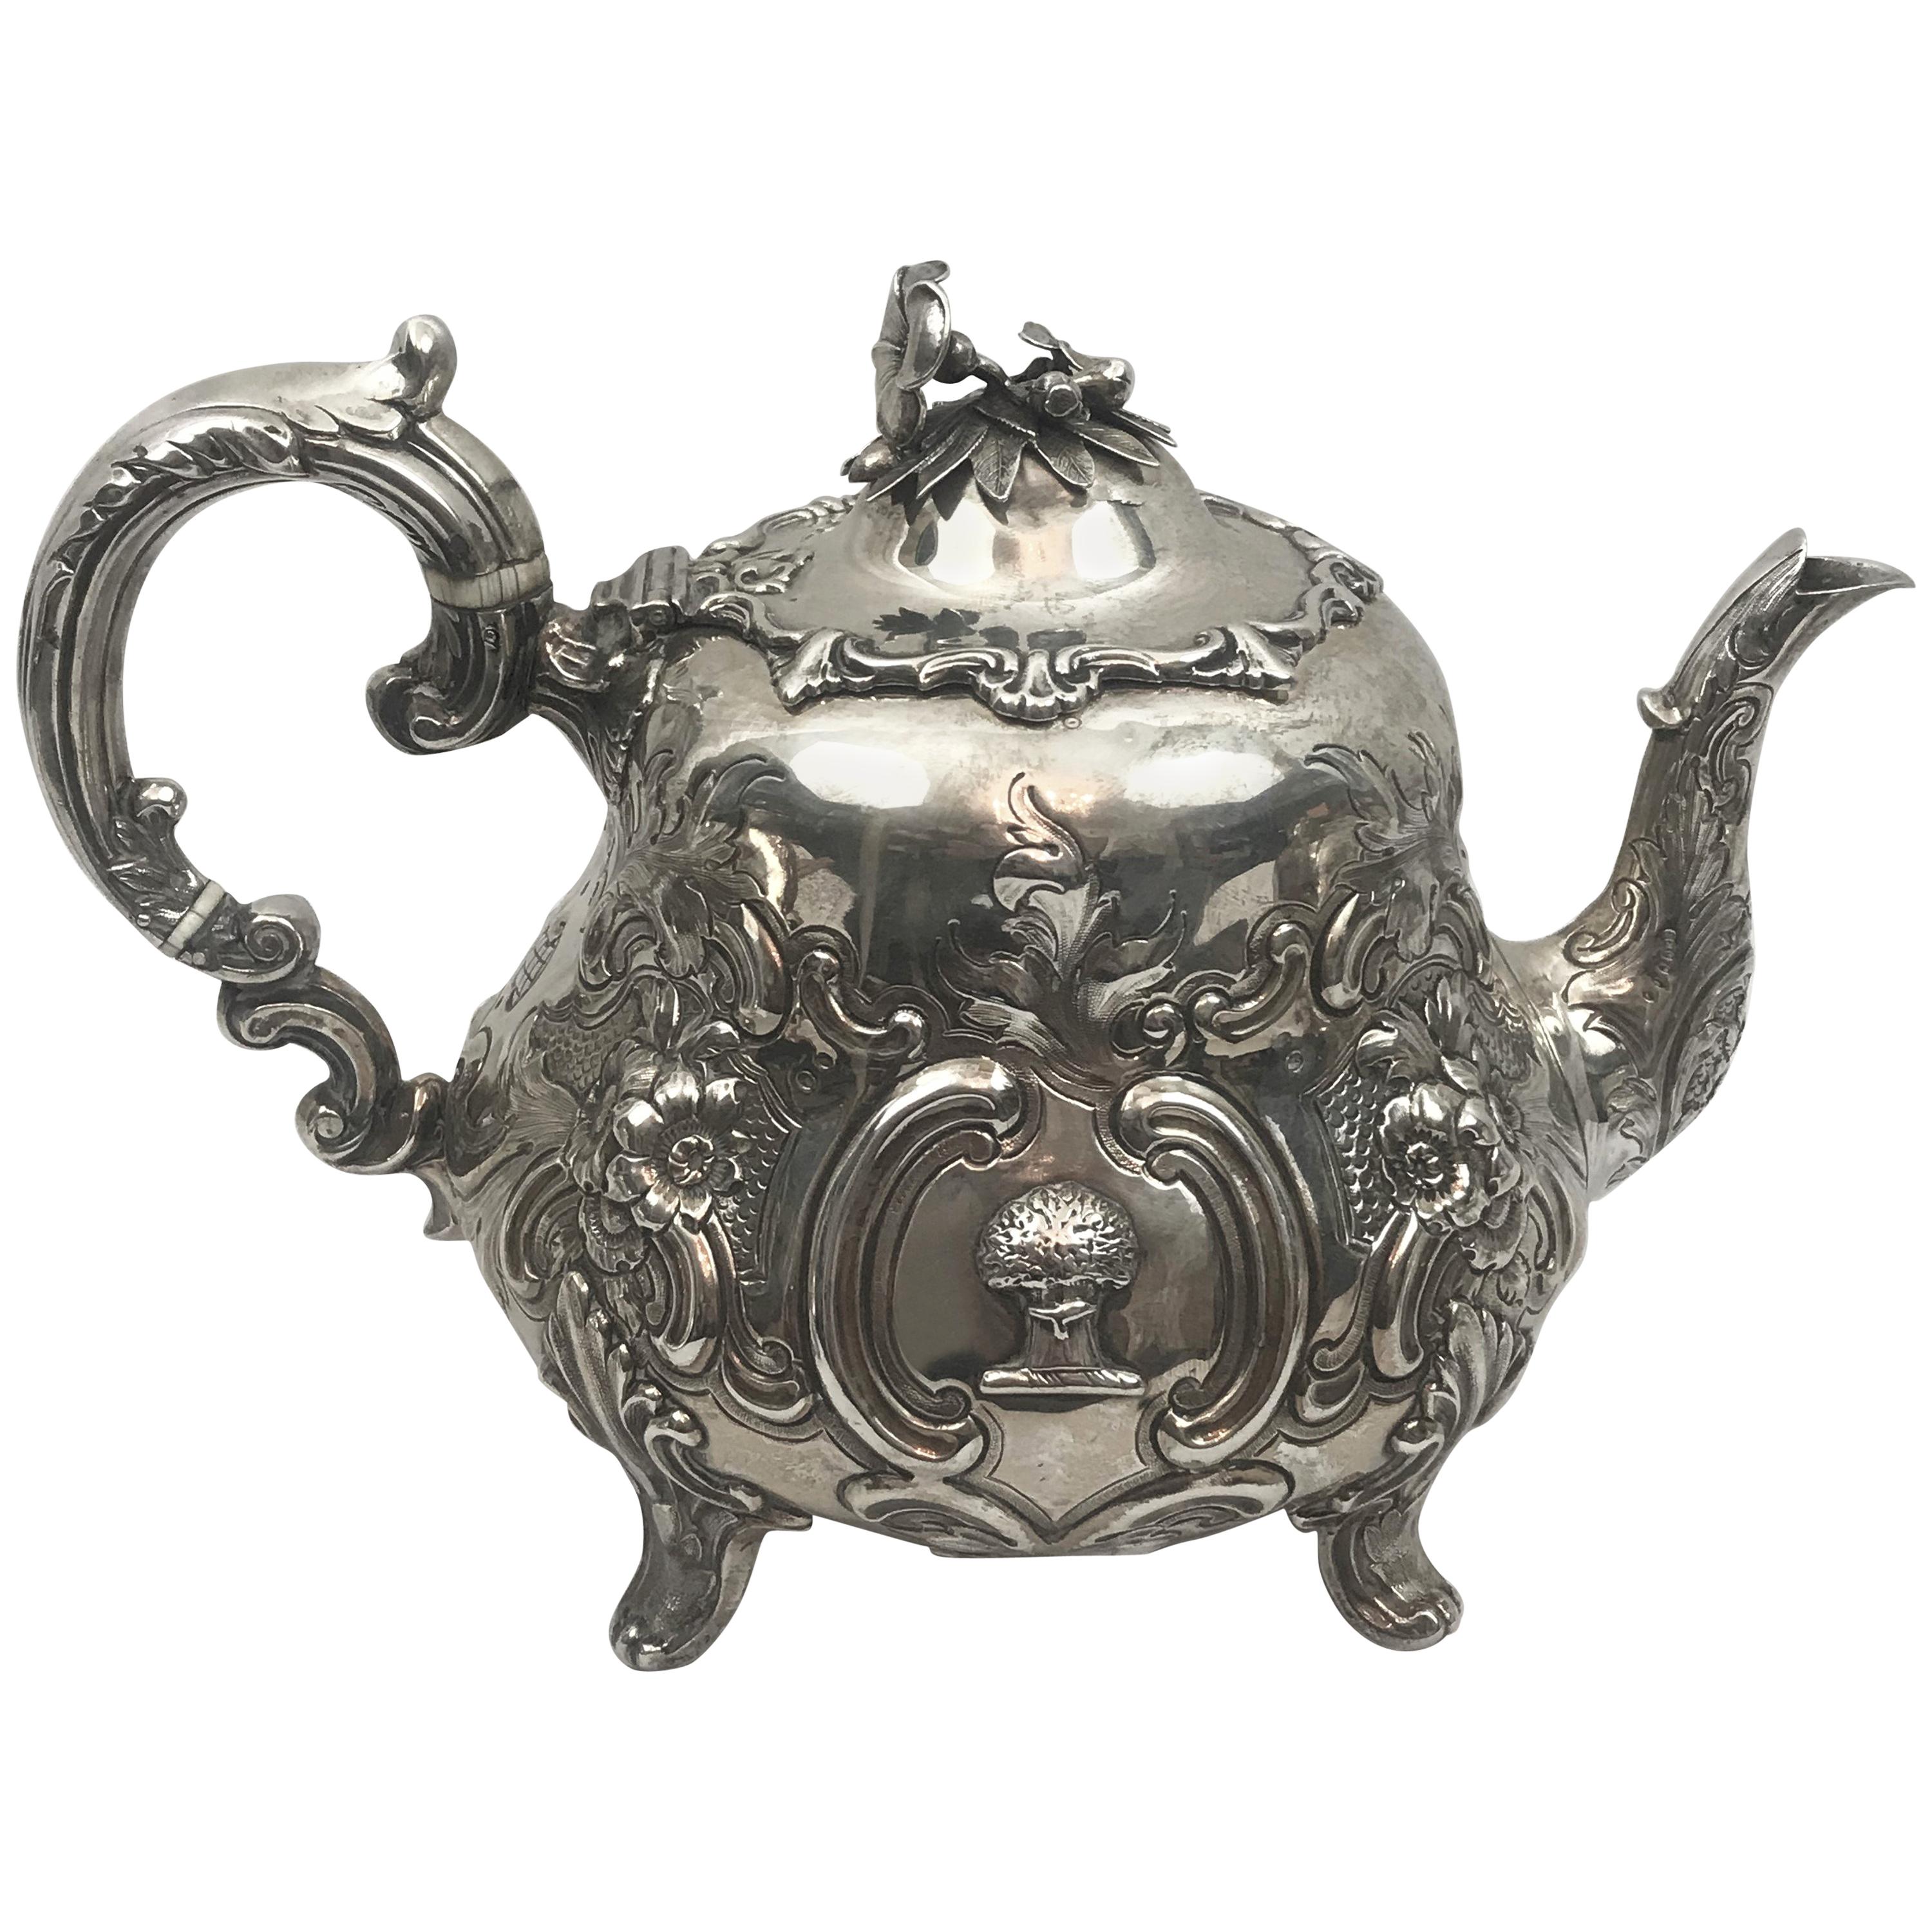 Victorian English Sterling Silver Repousse Teapot, London 1855, William Hunter